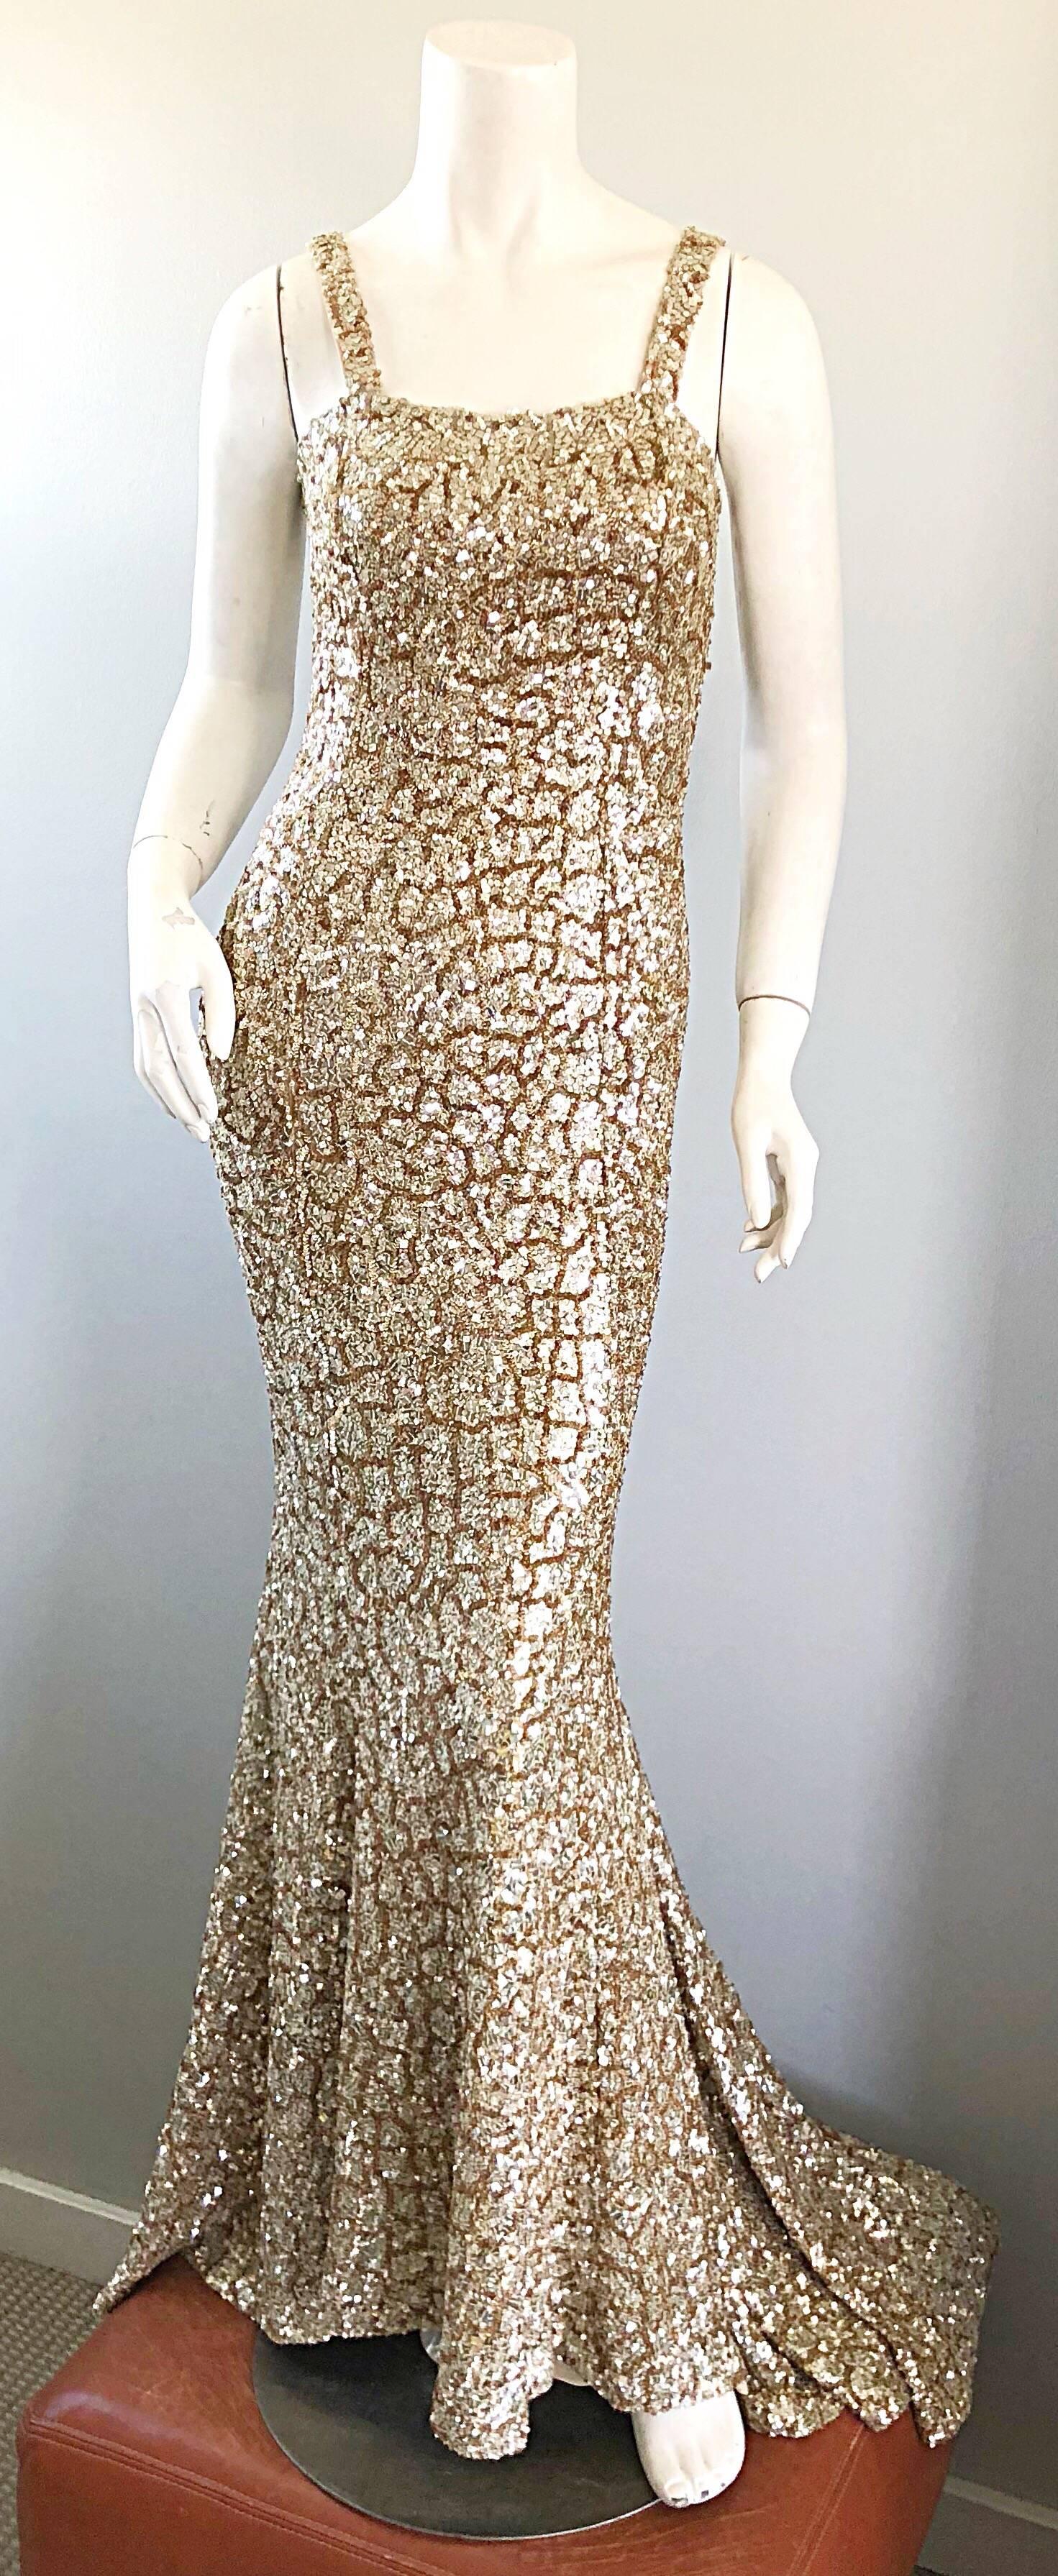 Monique Lhuillier Gorgeous Resort 2012 Gold Rose Gold Full Sequin Trained Gown  3